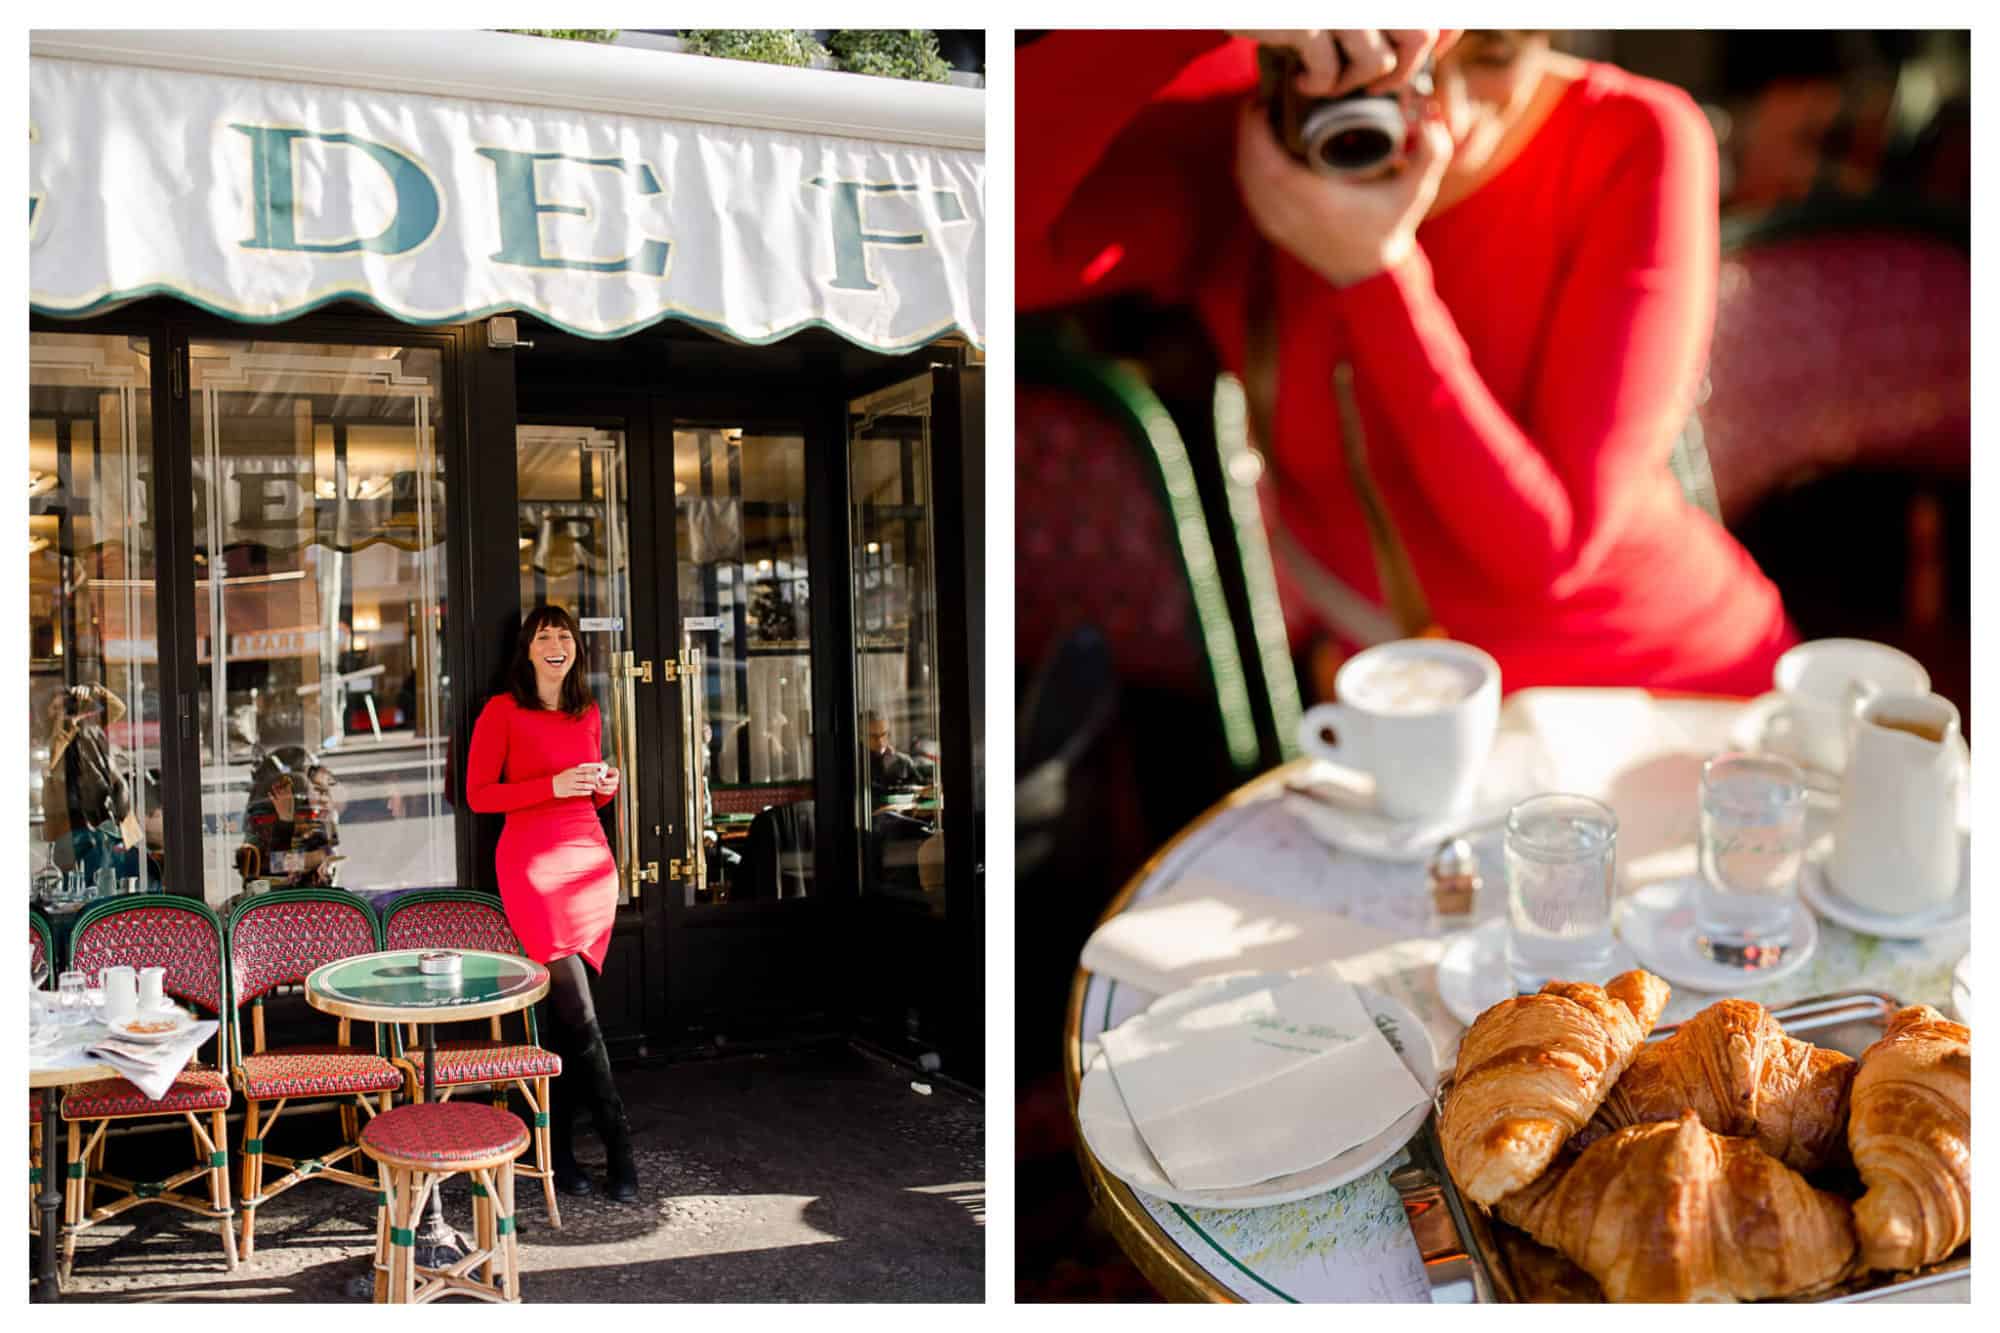 On left: Rebecca Plotnick, travel photographer and founder of the blog Everyday Parisian, smiles under the awning of one of her favorite cafés, Café de Flore, in Paris' Saint-Germain-des-Près neighborhood. on right: Rebecca snaps a photo on a vintage camera of a sumptuous spread of warm croissants and coffee at Café de Flore.  